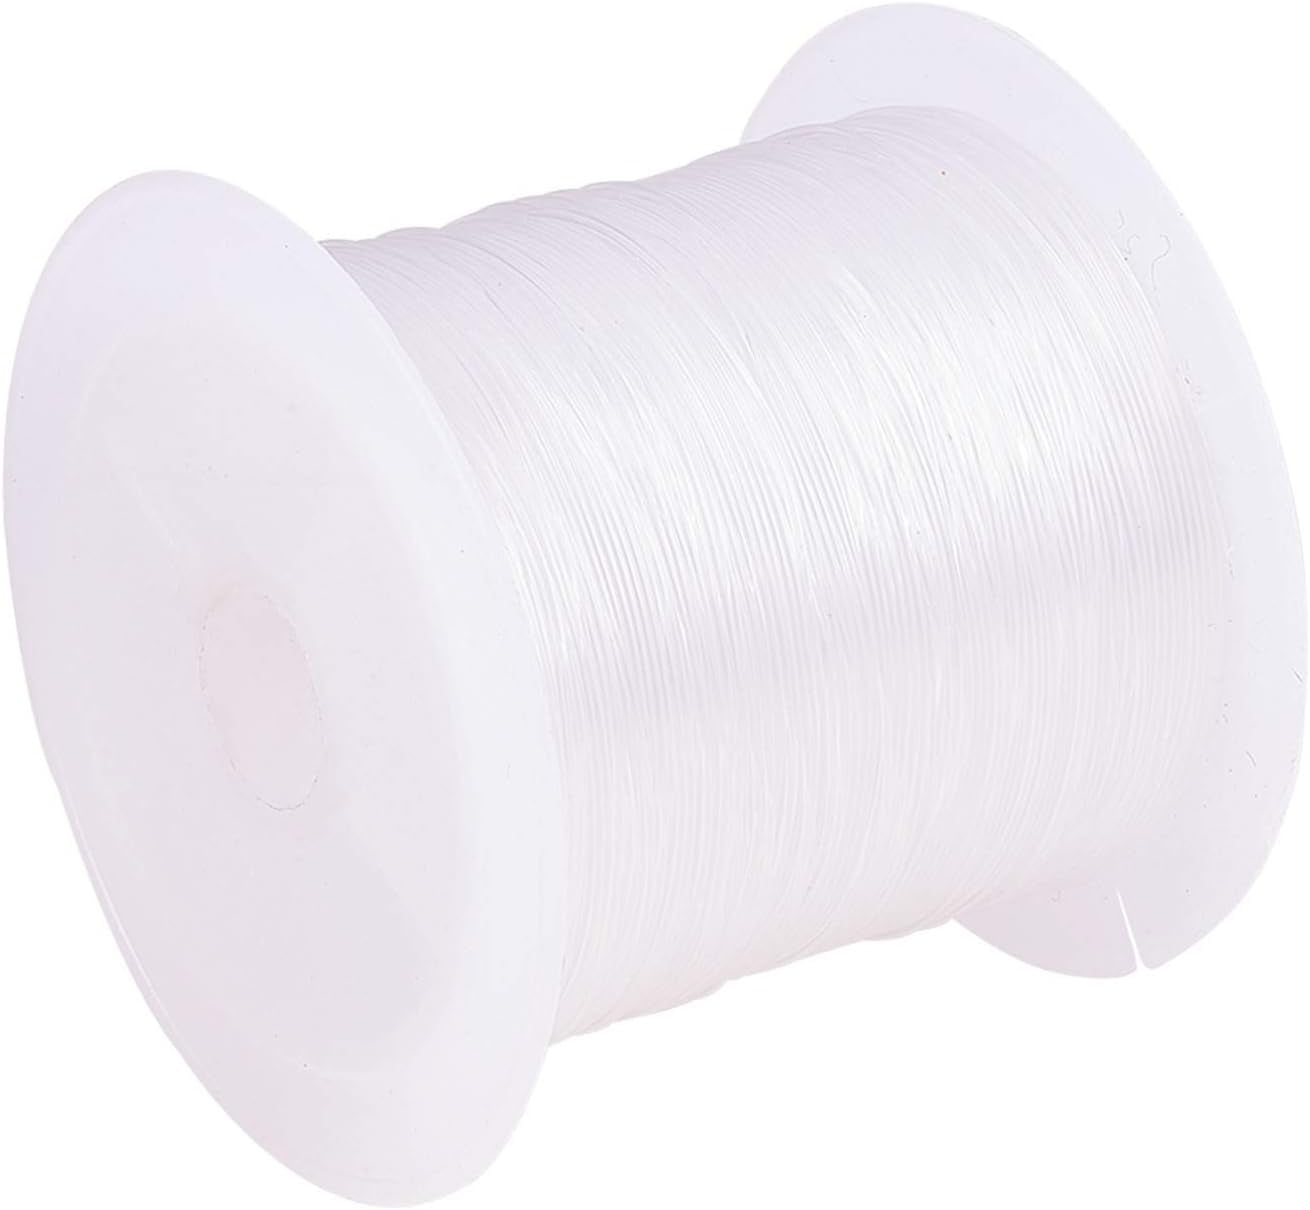 Realyc 1 Roll Nylon Waxed Craft Cord Breathable Clear Texture